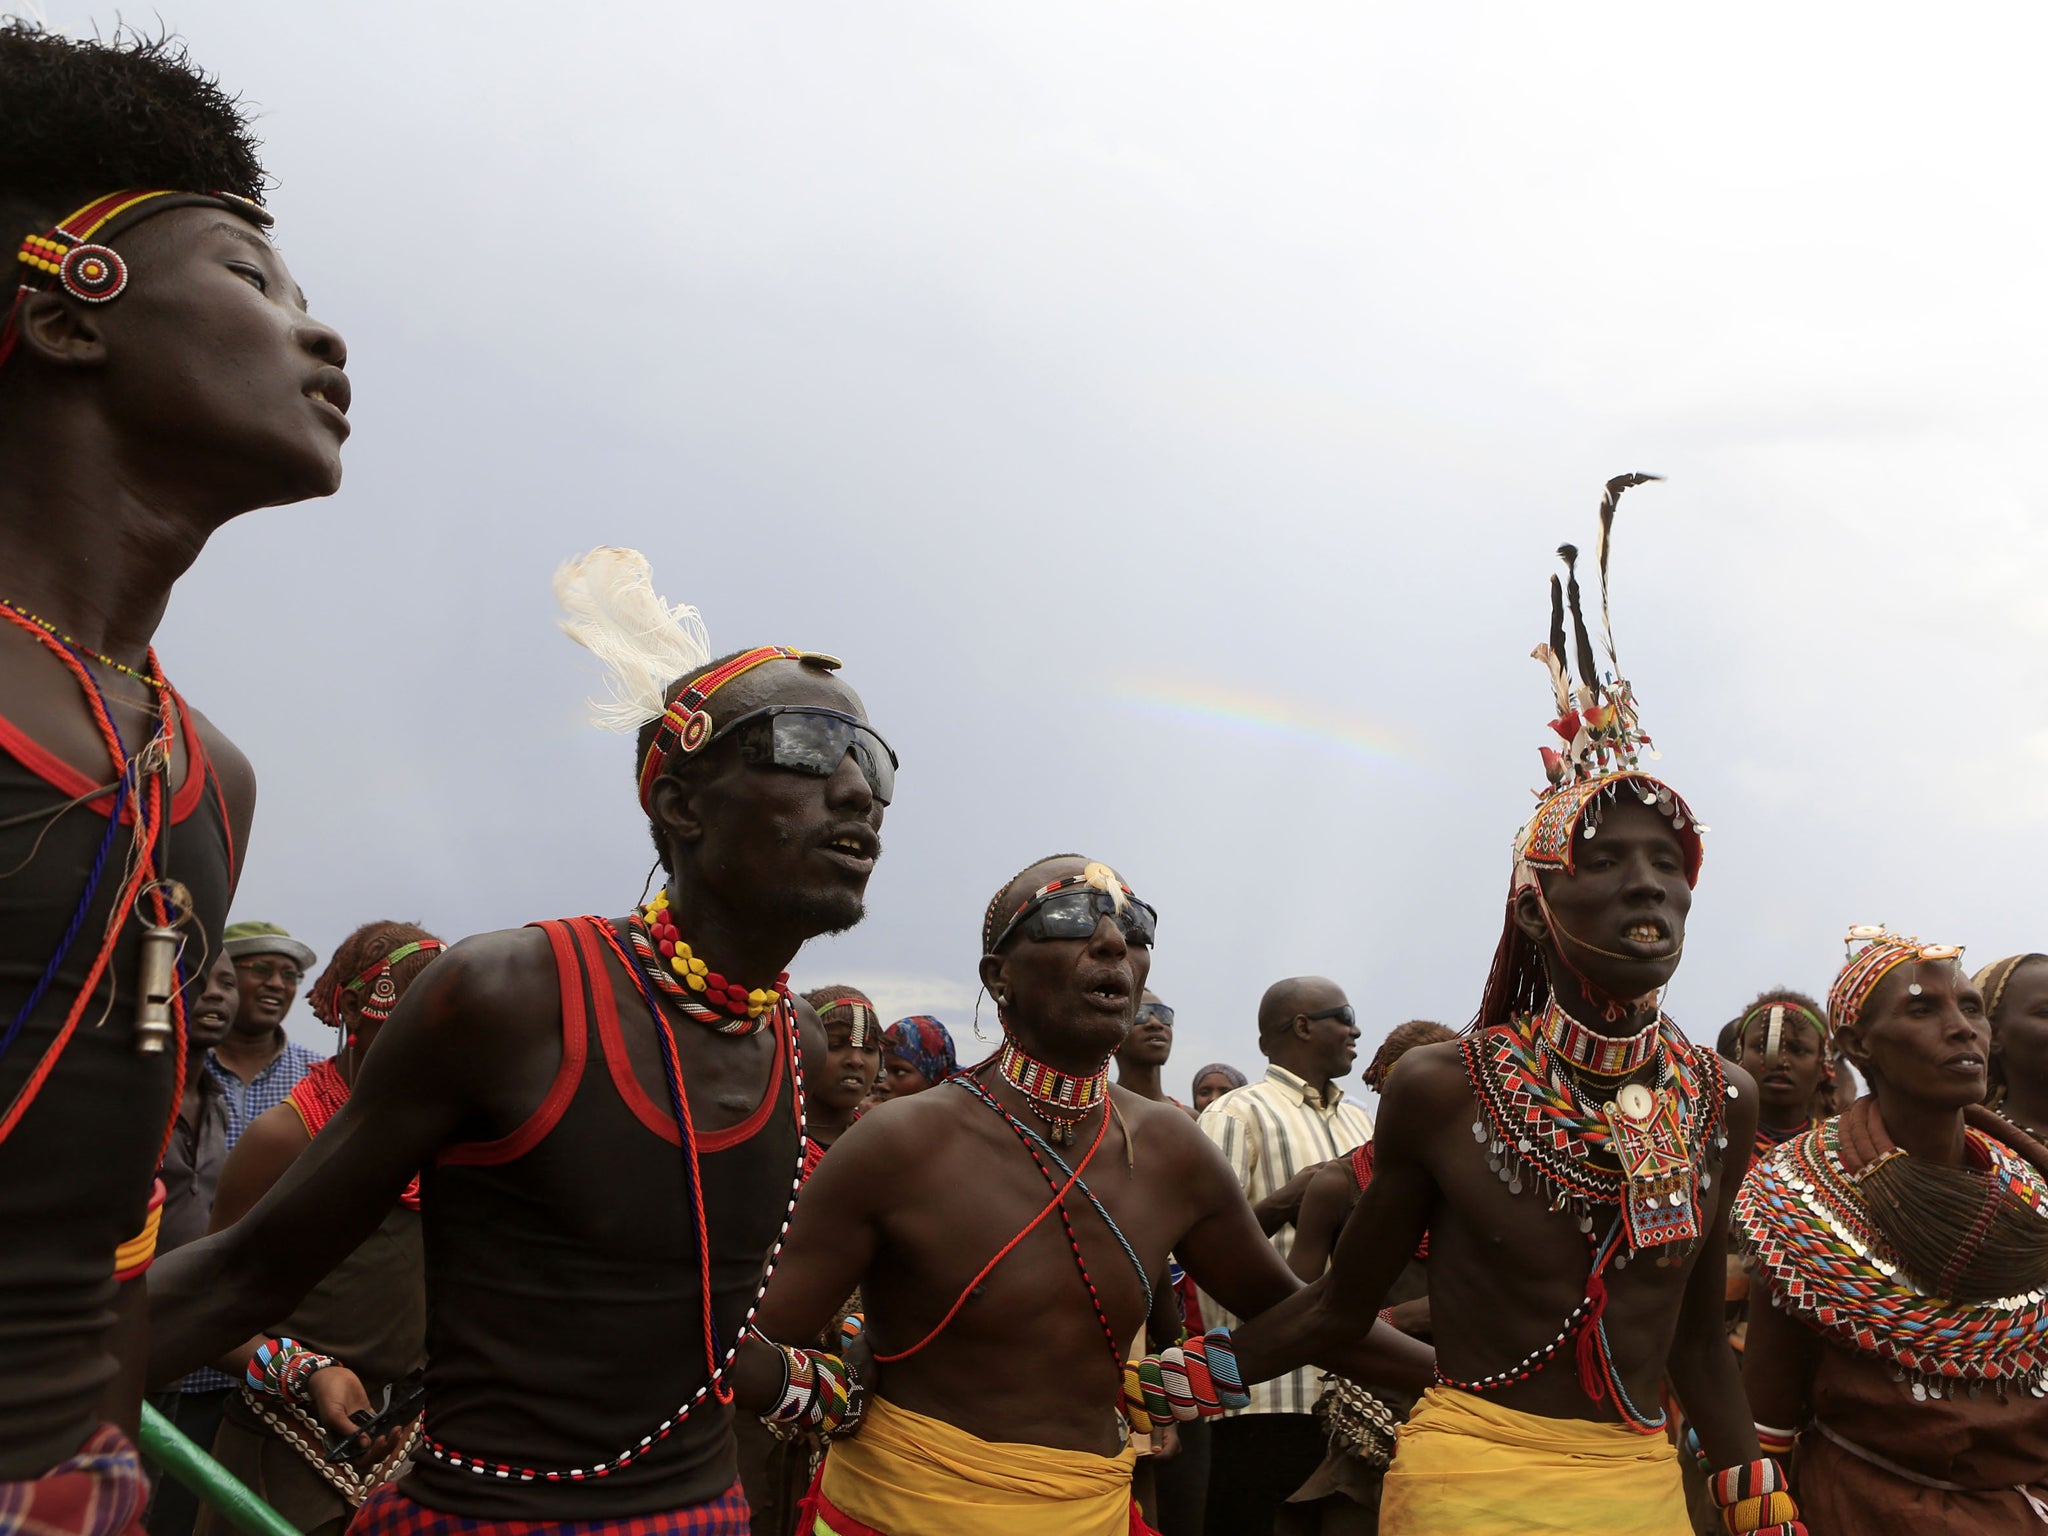 Turkana men dance and sing during the hybrid solar eclipse at the remote Sibiloi National Park on the shore of Lake Turkana, November 3, 2013